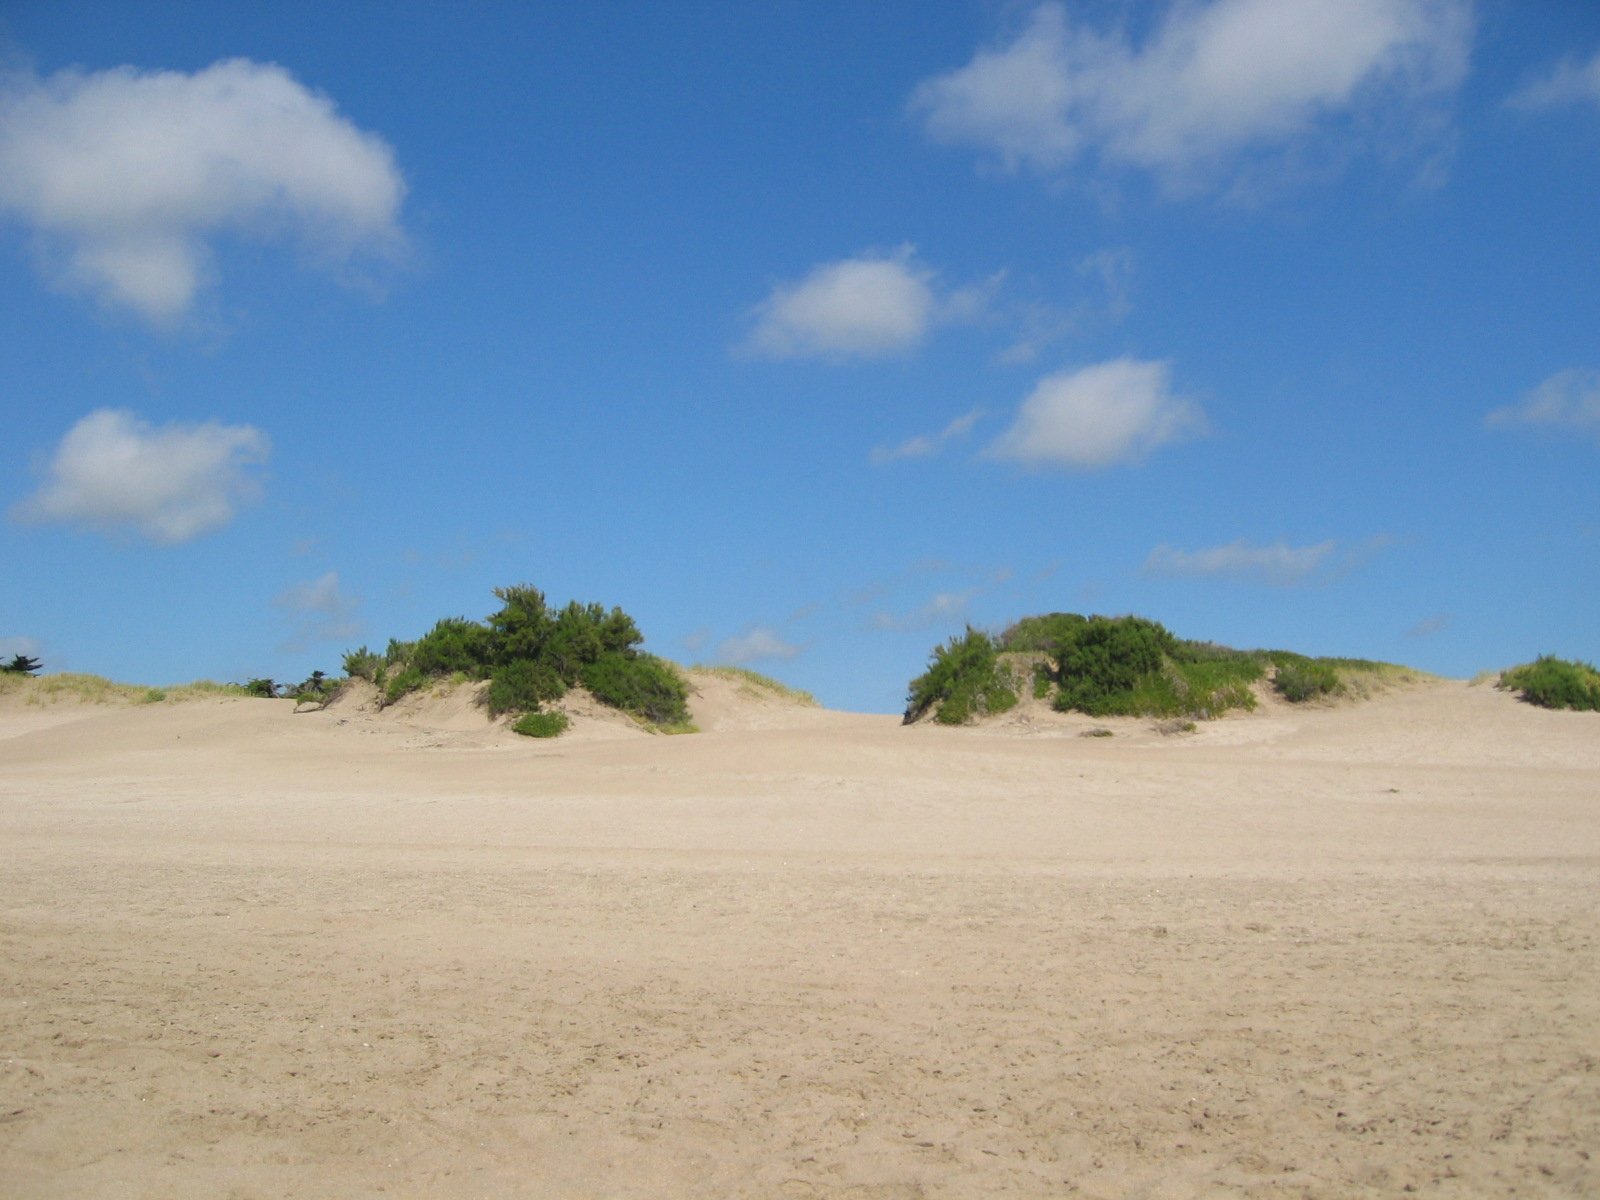 the sky and sand dunes are very light tan